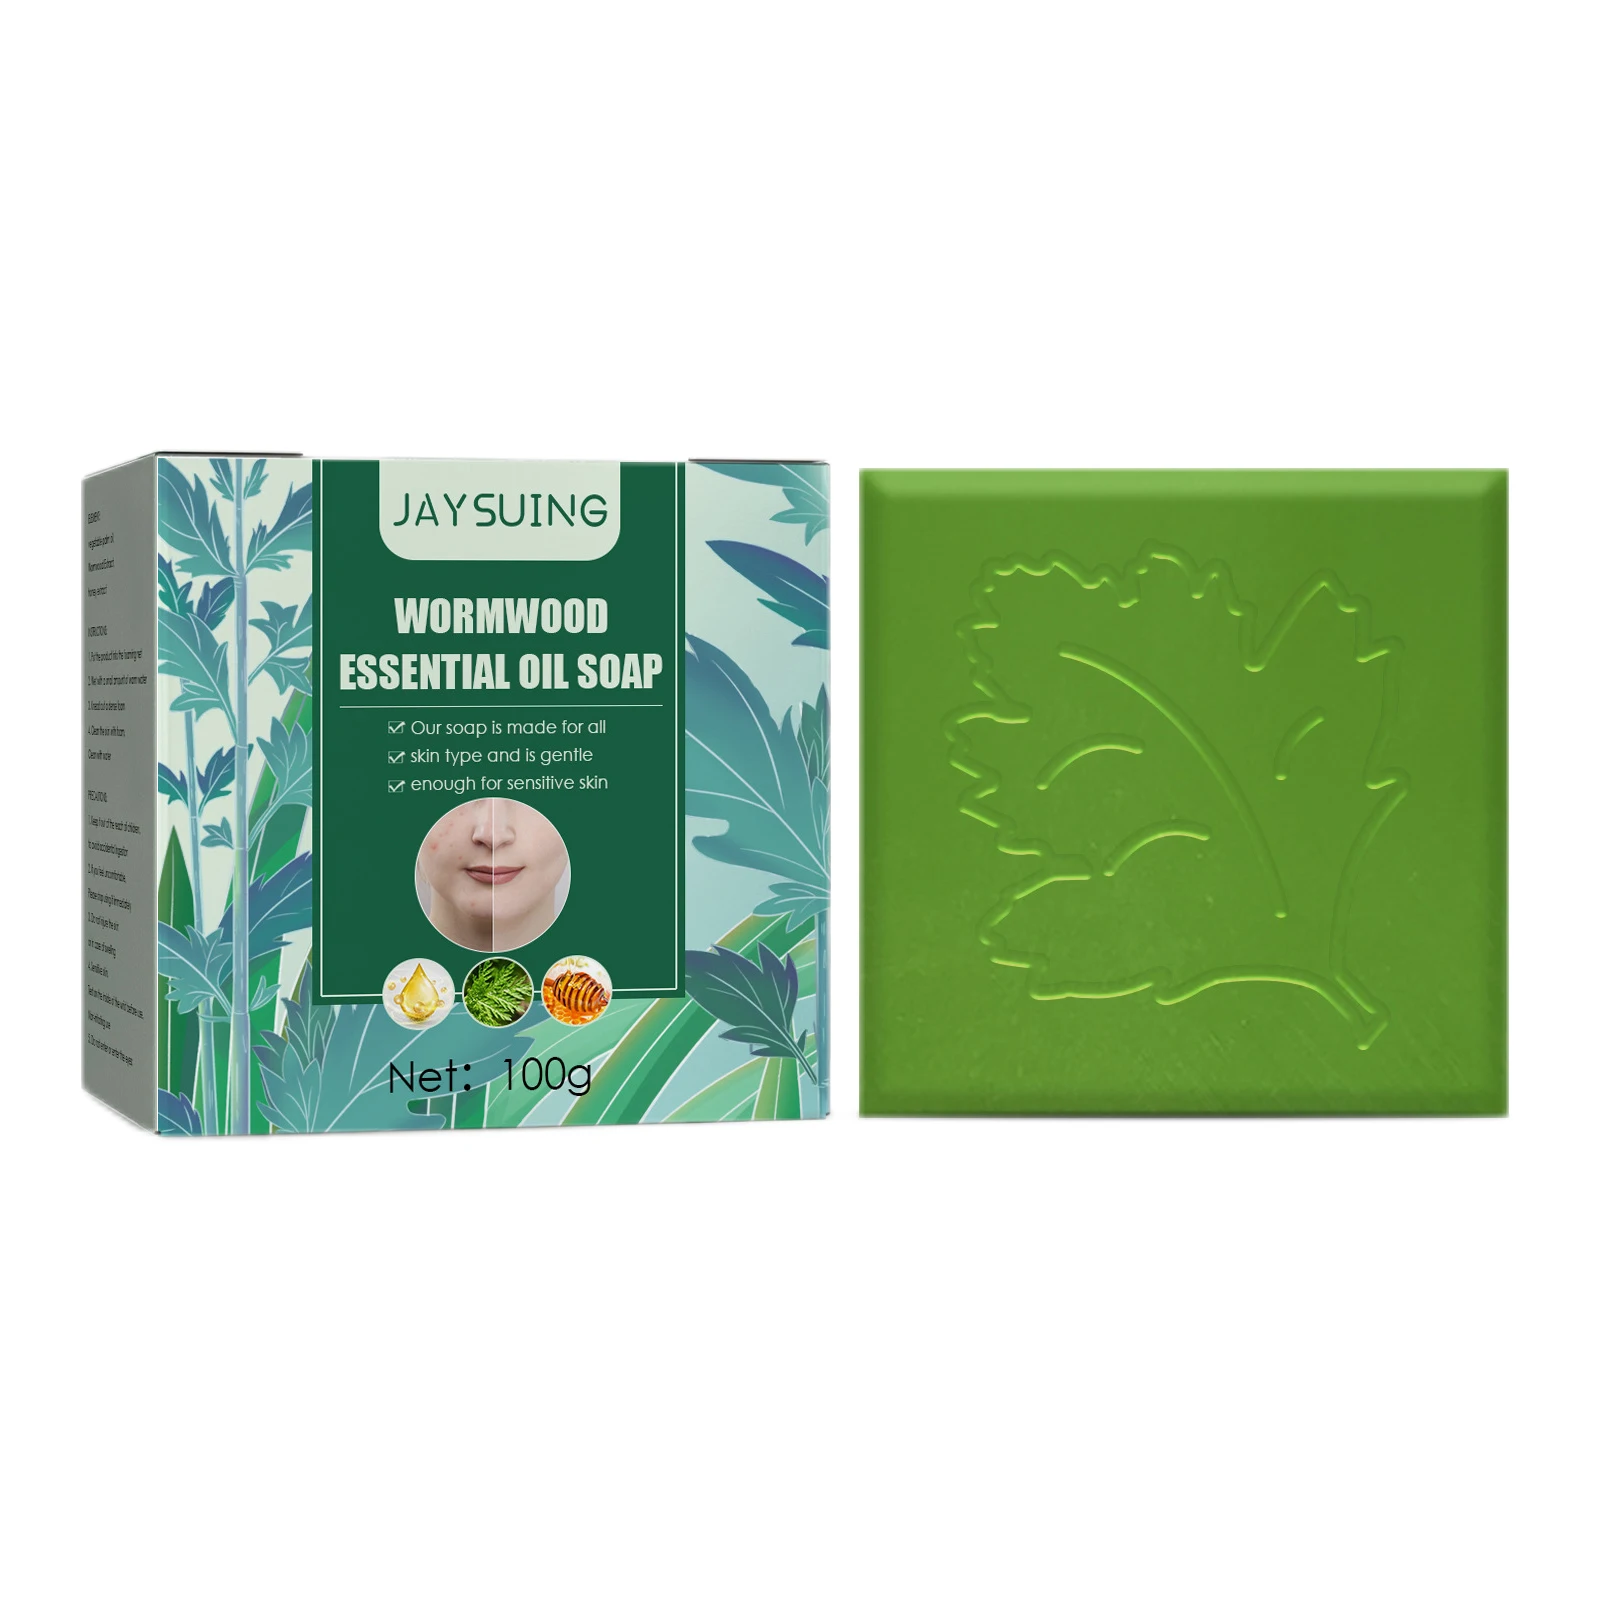 

Facial Cleansing Bar Wormwood Bar Soap For All Skin Types Lymphatic Organic Soap Moisturizing Deep Cleaning And Effective Bath